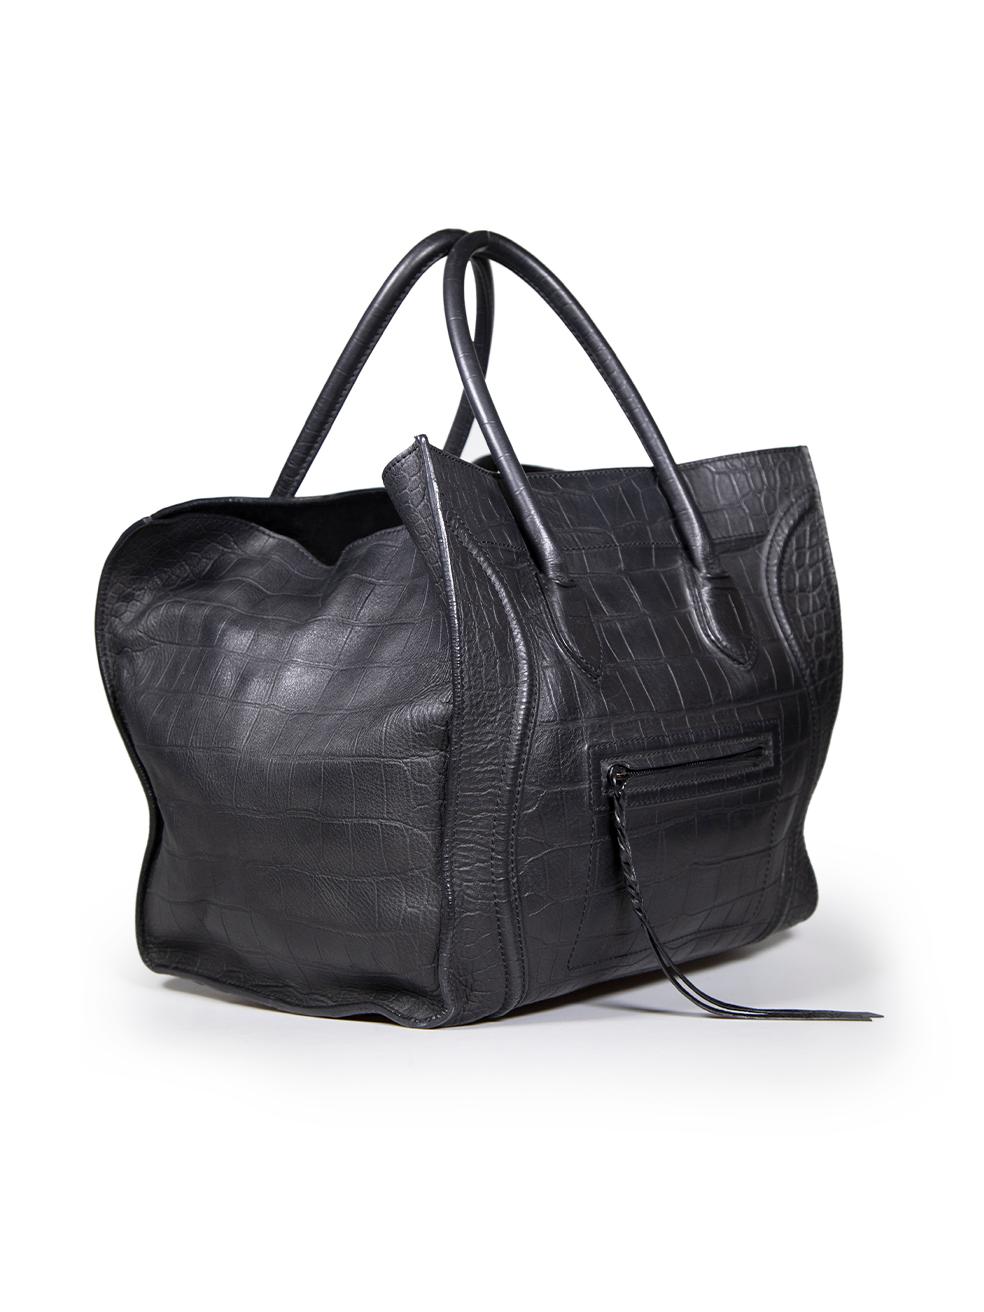 CONDITION is Good. General wear to bag is evident. Moderate signs of wear to the front, back, sides, base and lining with scratches, abrasions and marks to the leather. Marks to the lining is seen on this used Céline designer resale